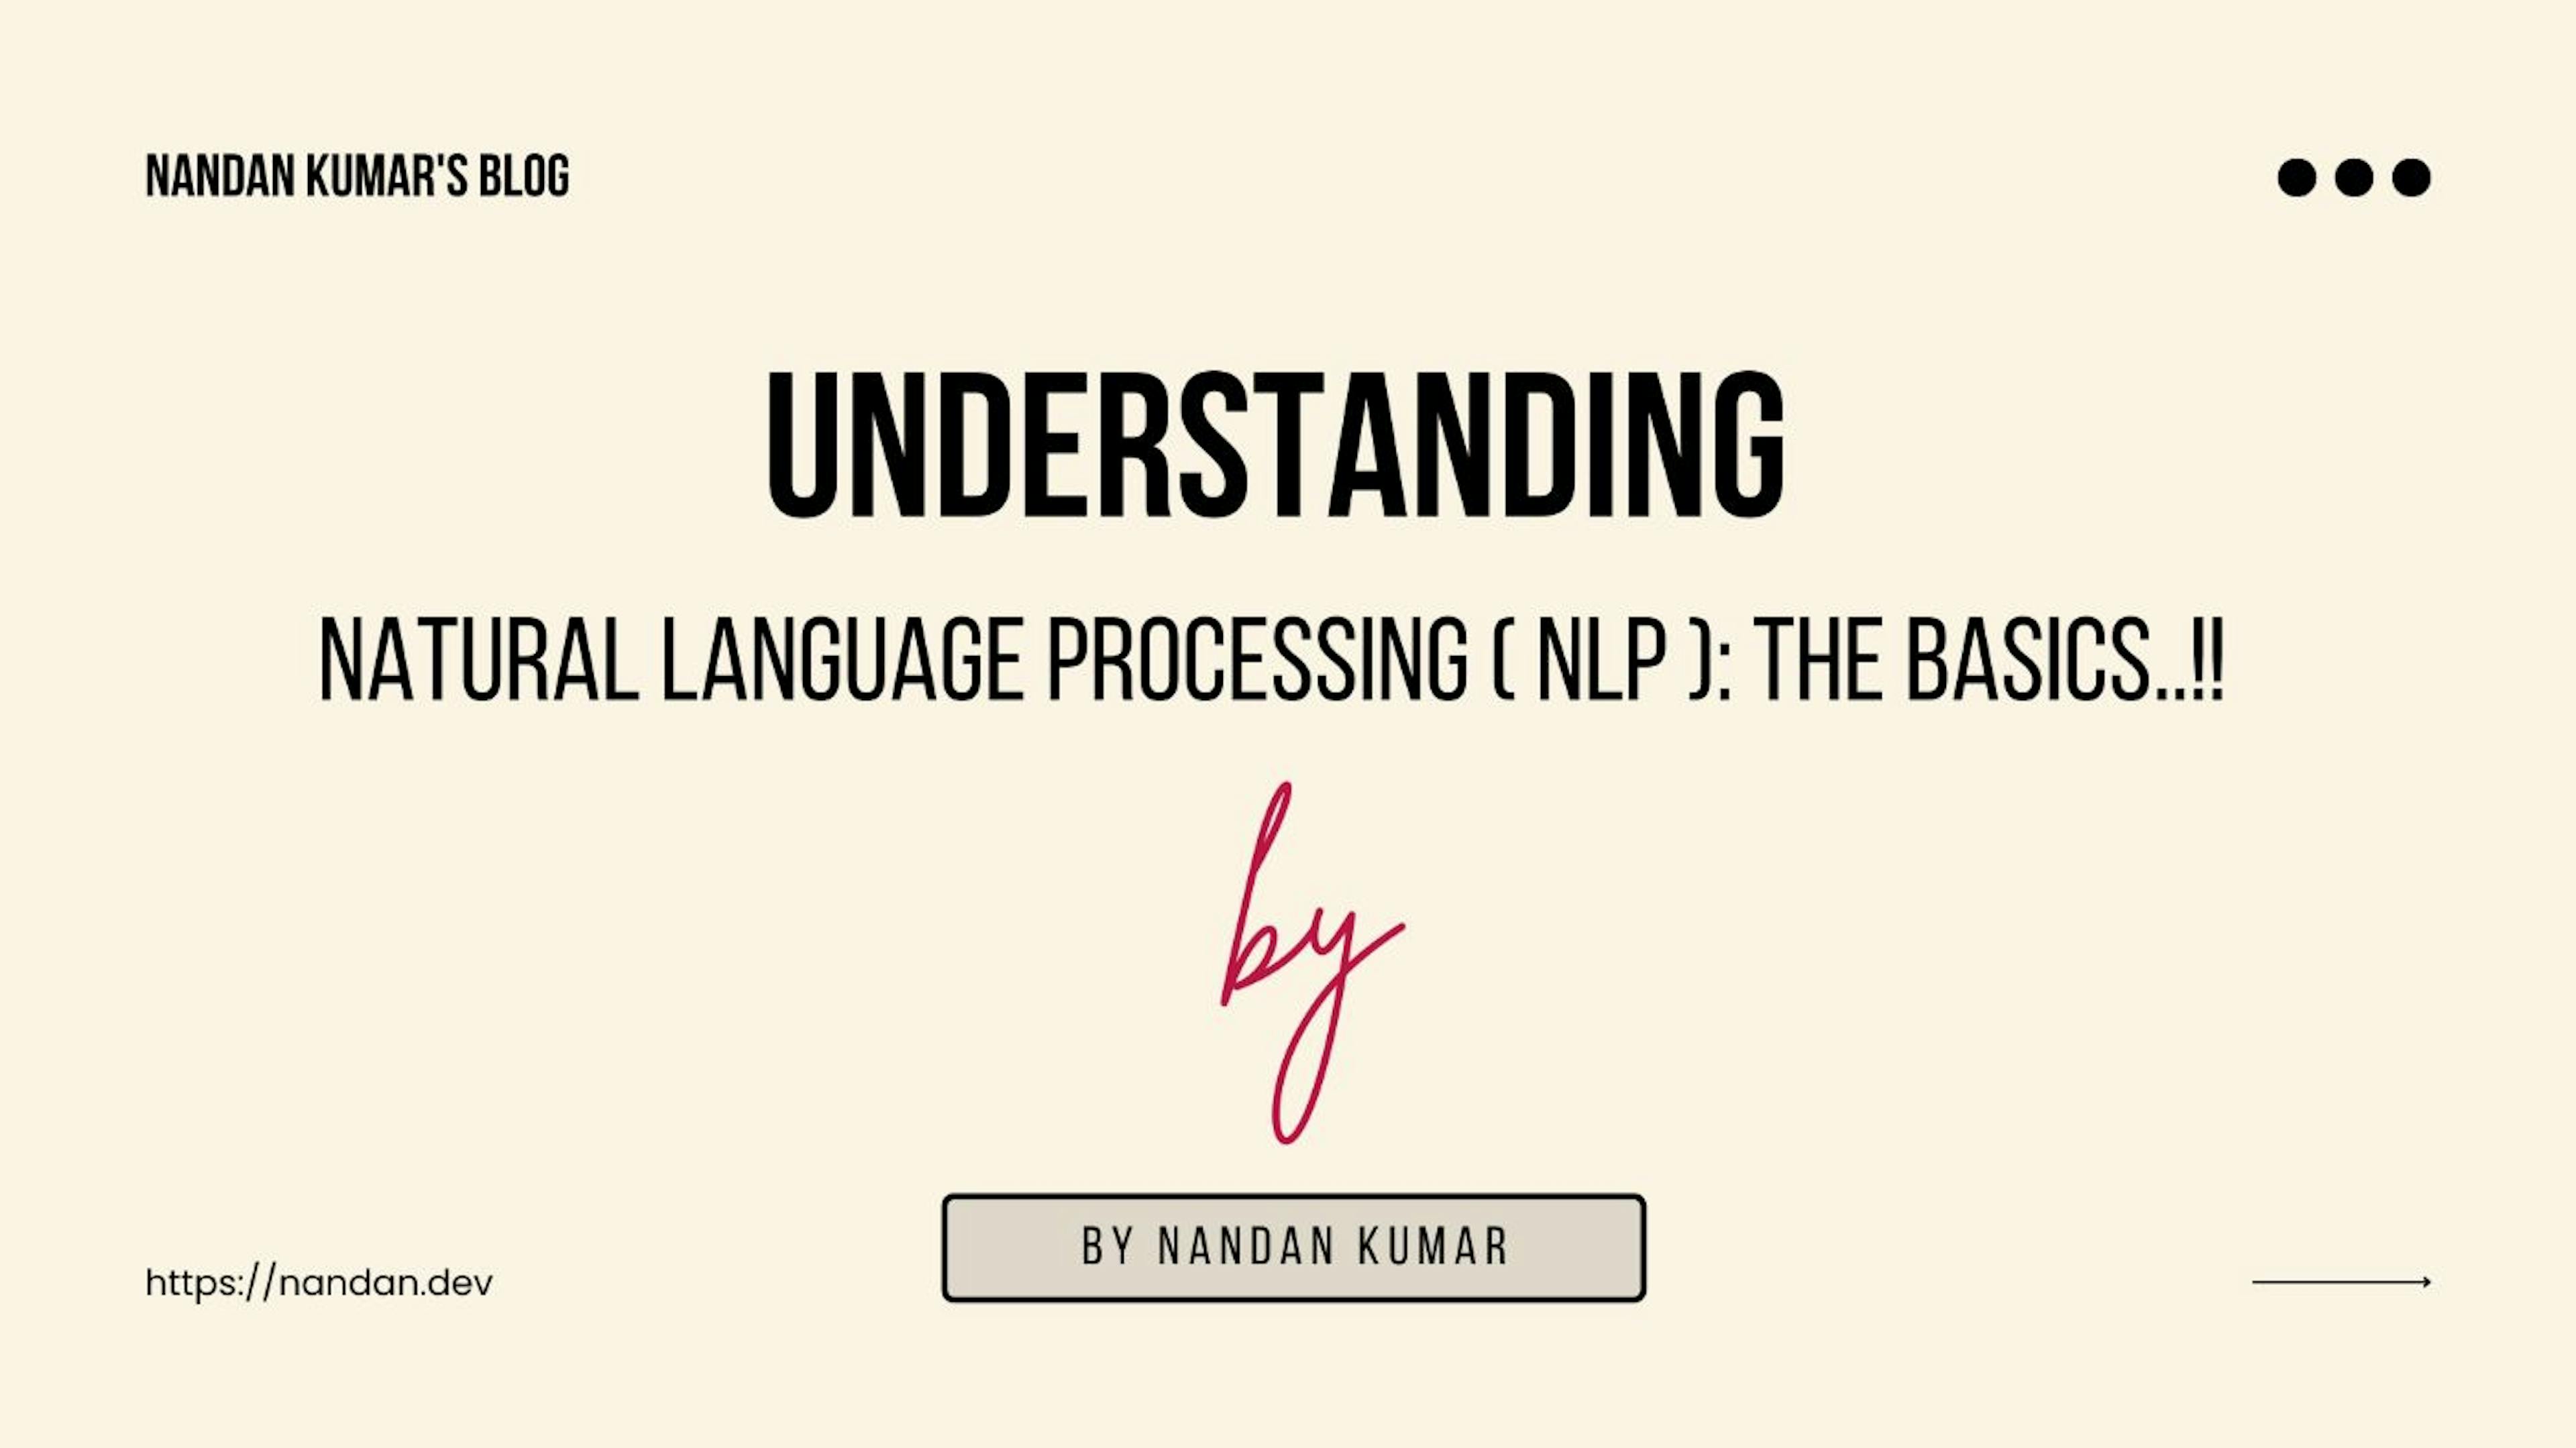 featured image - Natural Language Processing Essentials: A Simple Introduction and Some Key Insights From a Dev